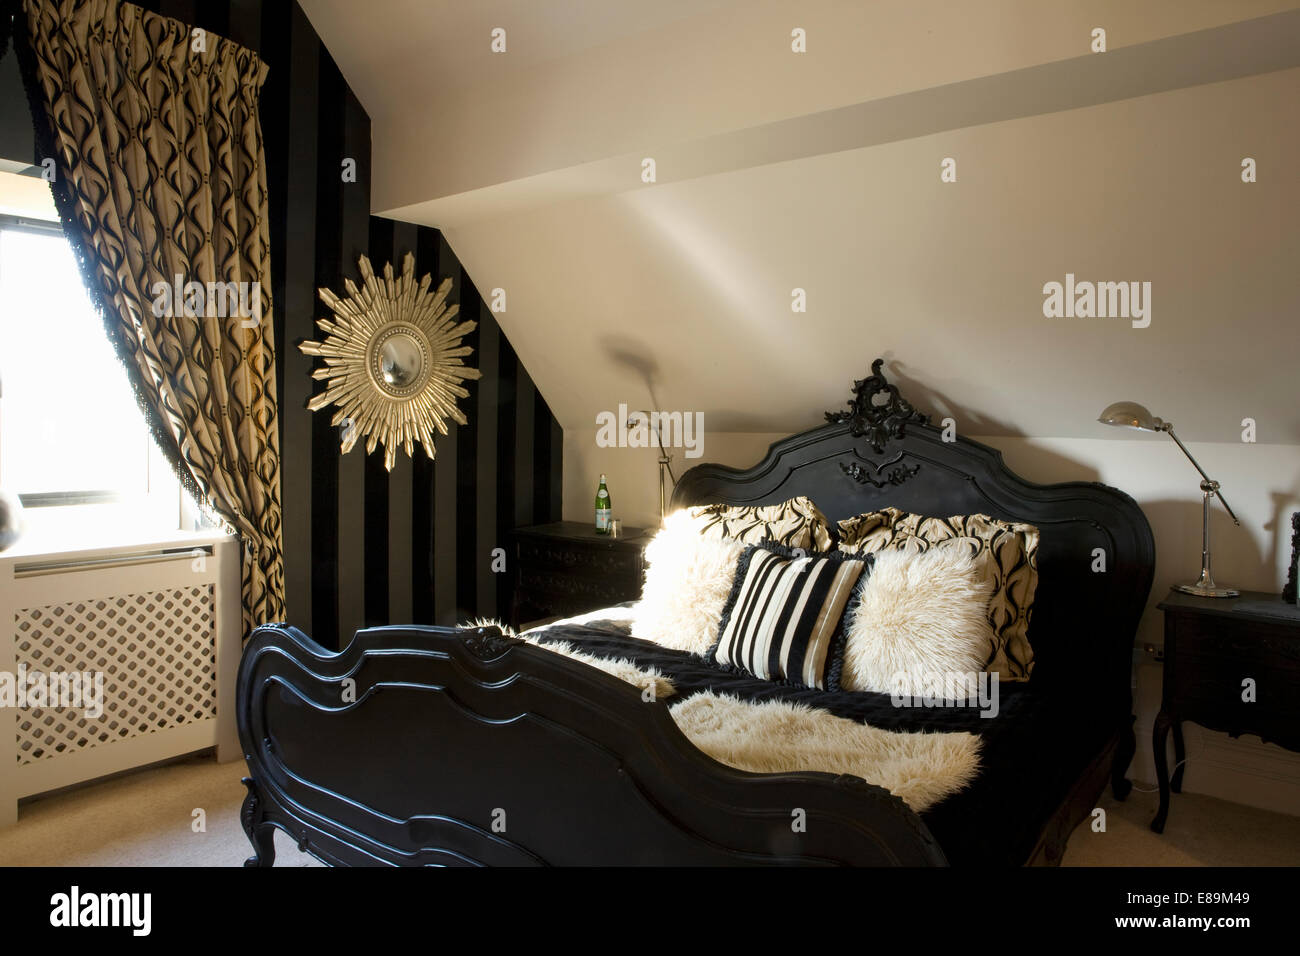 Period style black bed with faux fur cushions in loft conversion bedroom with black+gold patterned curtain Stock Photo